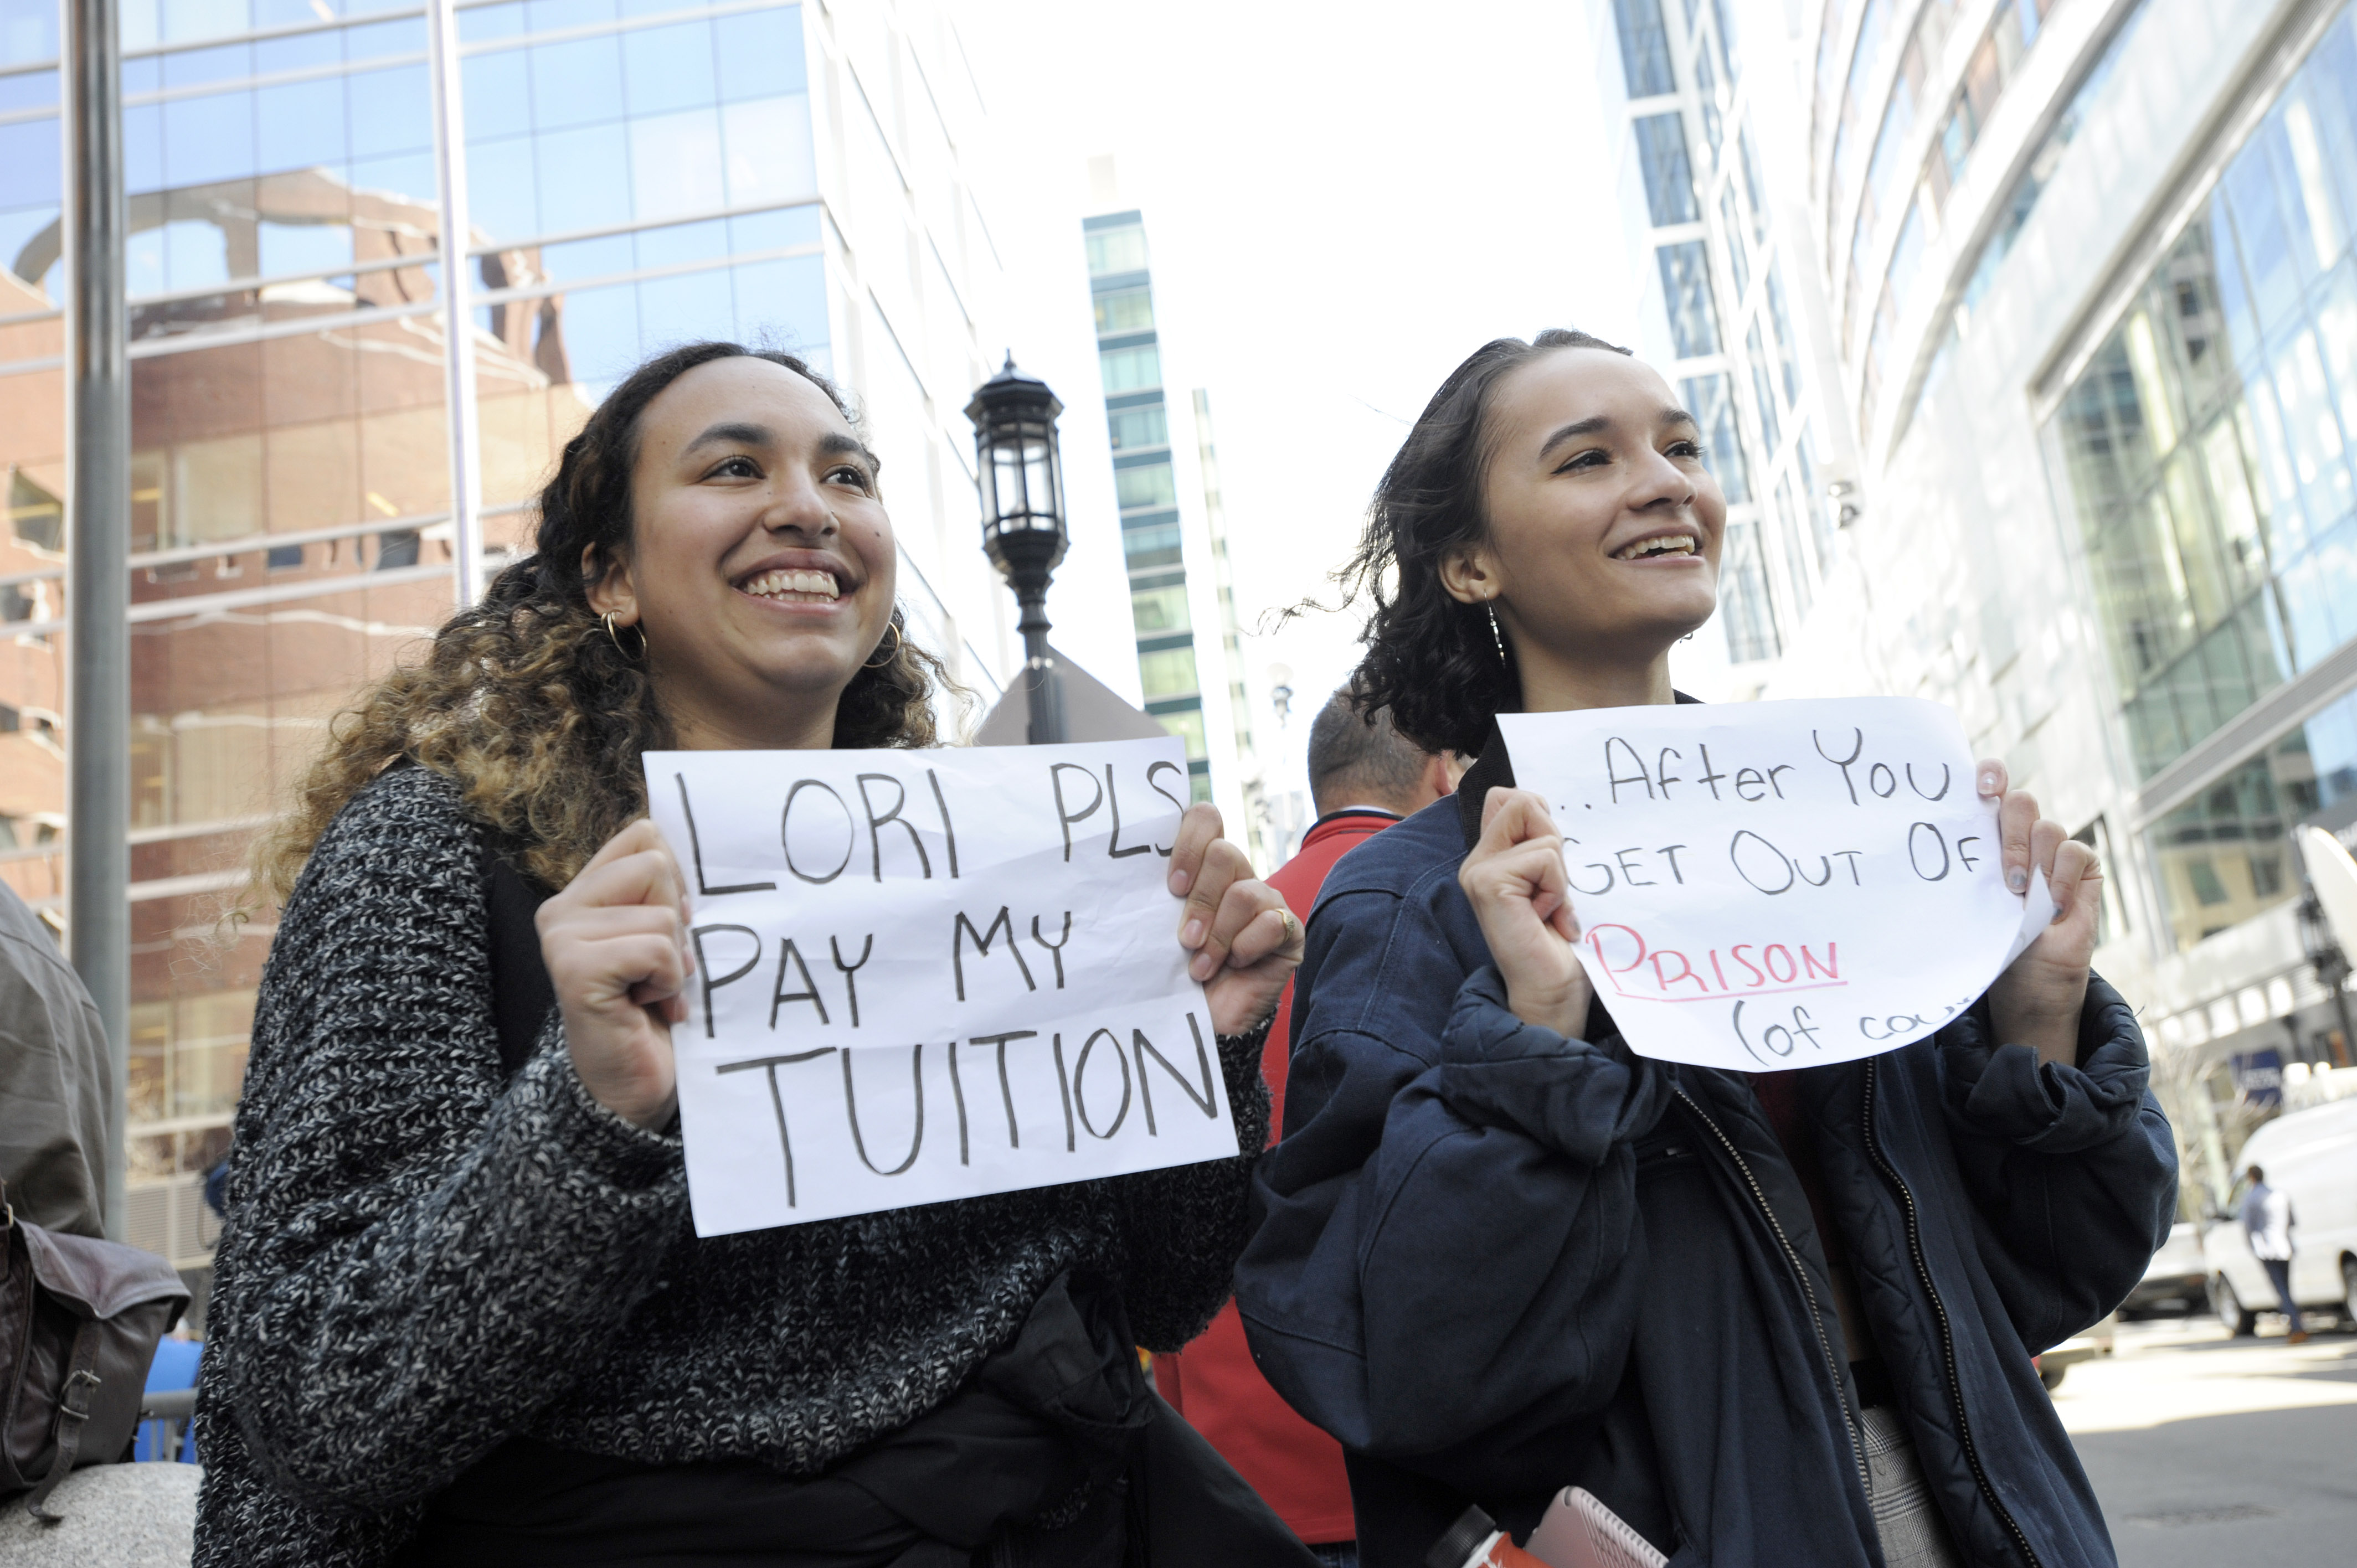 Mackenzie Thomas and Vivi Bonomie hold signs outside federal court in Boston, where actor Lori Loughlin was facing criminal charges related to a college admissions scandal, on April 3, 2019. (Joseph Prezioso—AFP/Getty Images)